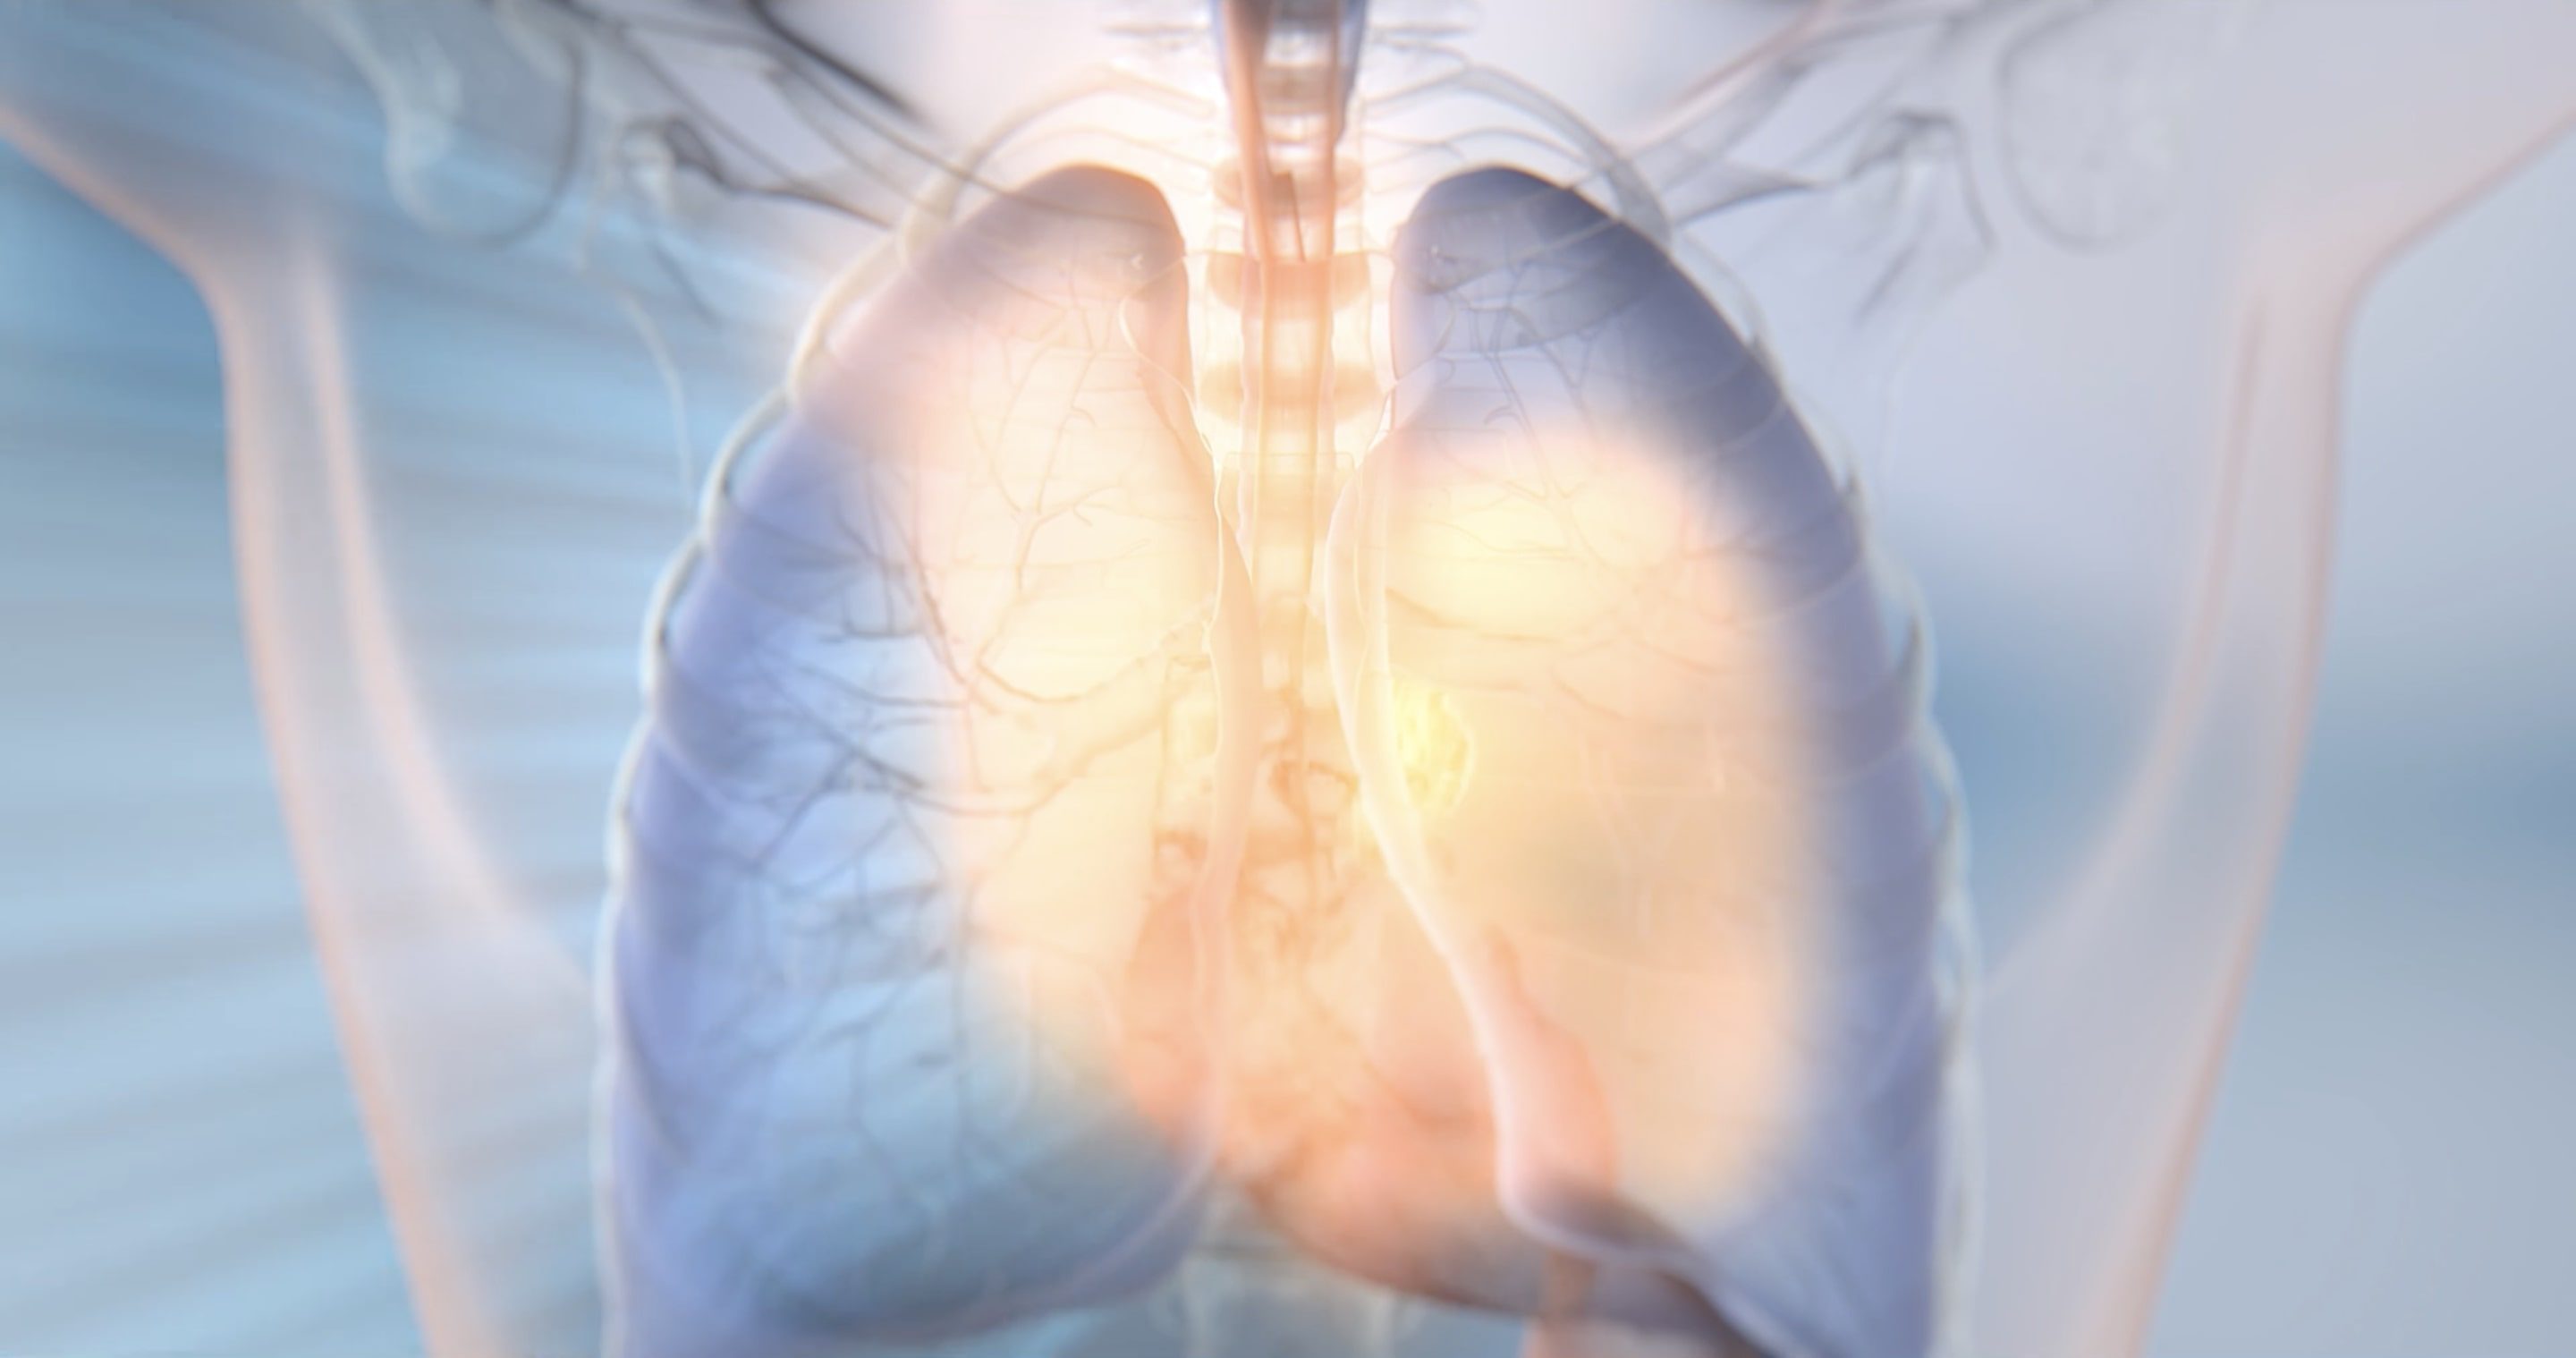 A 3D reconstruction of a lung cancer